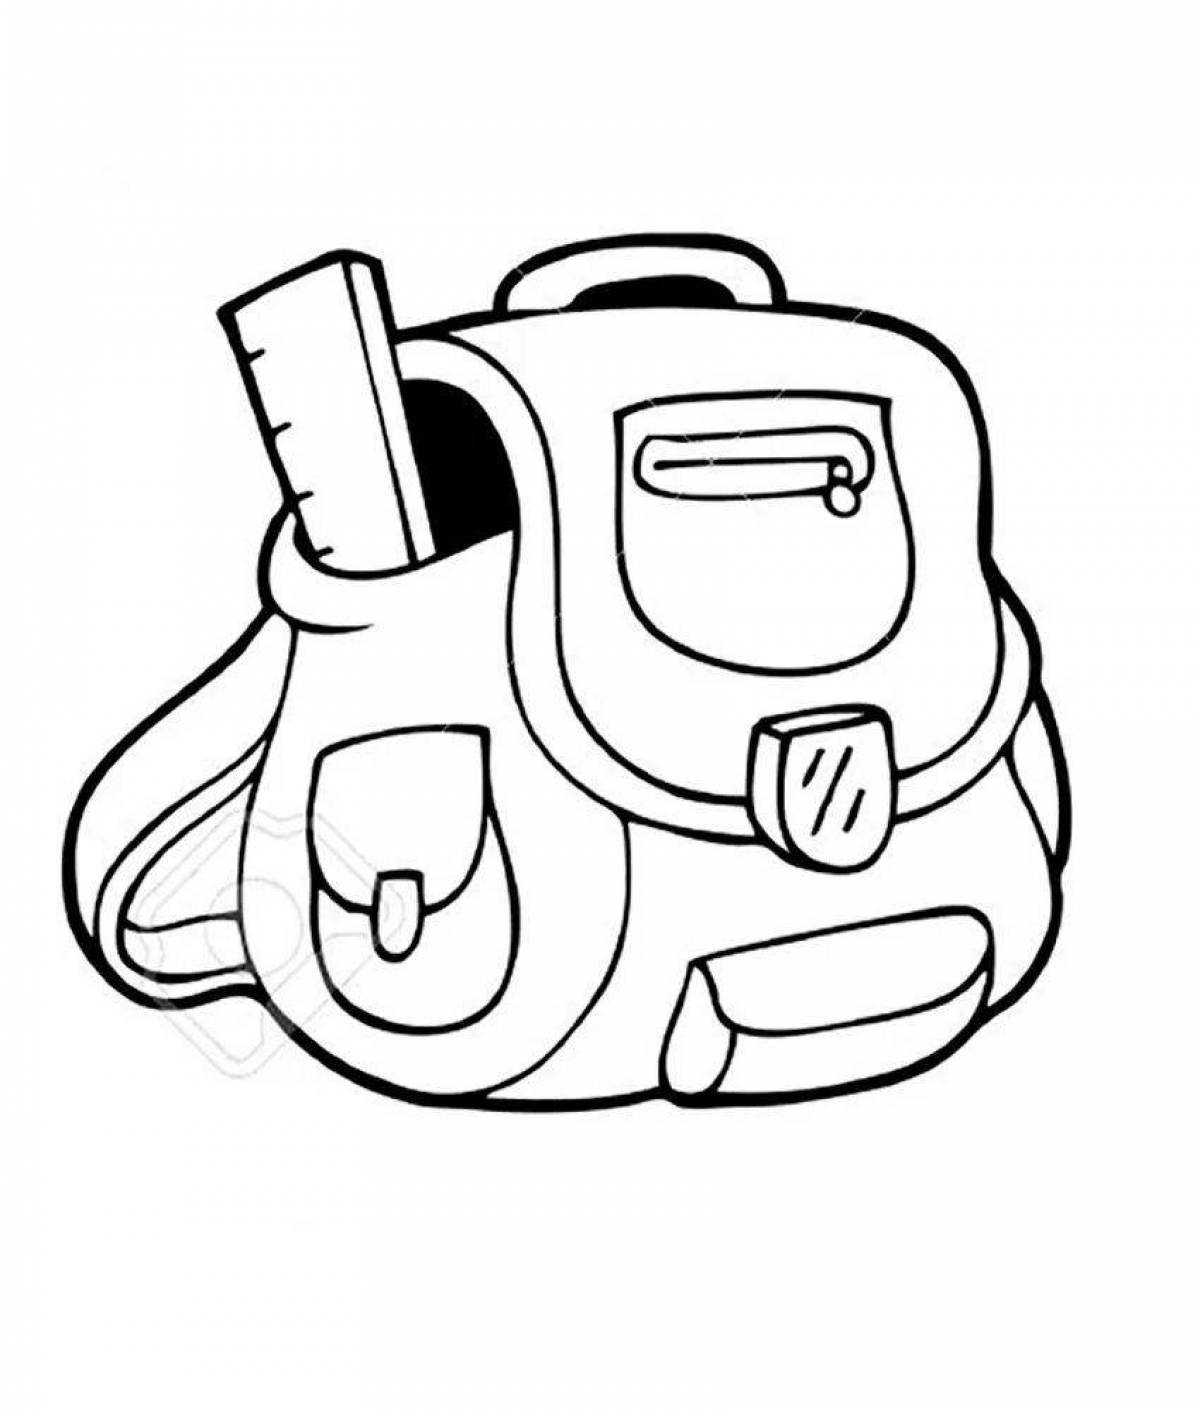 Coloring page beautiful school bag